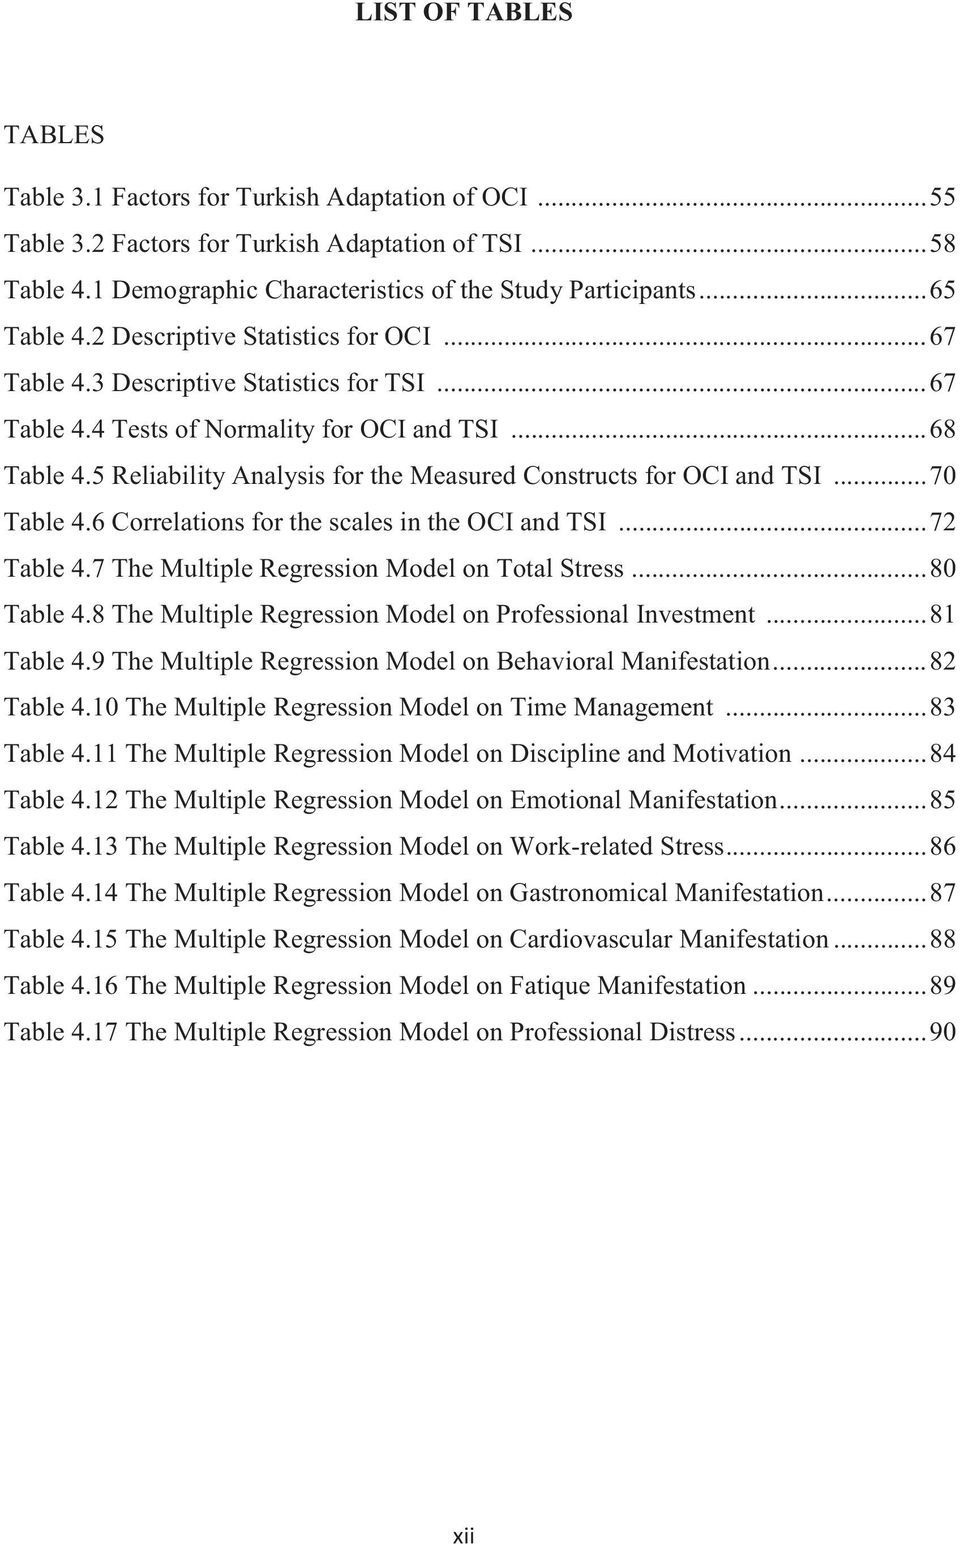 5 Reliability Analysis for the Measured Constructs for OCI and TSI... 70 Table 4.6 Correlations for the scales in the OCI and TSI... 72 Table 4.7 The Multiple Regression Model on Total Stress.